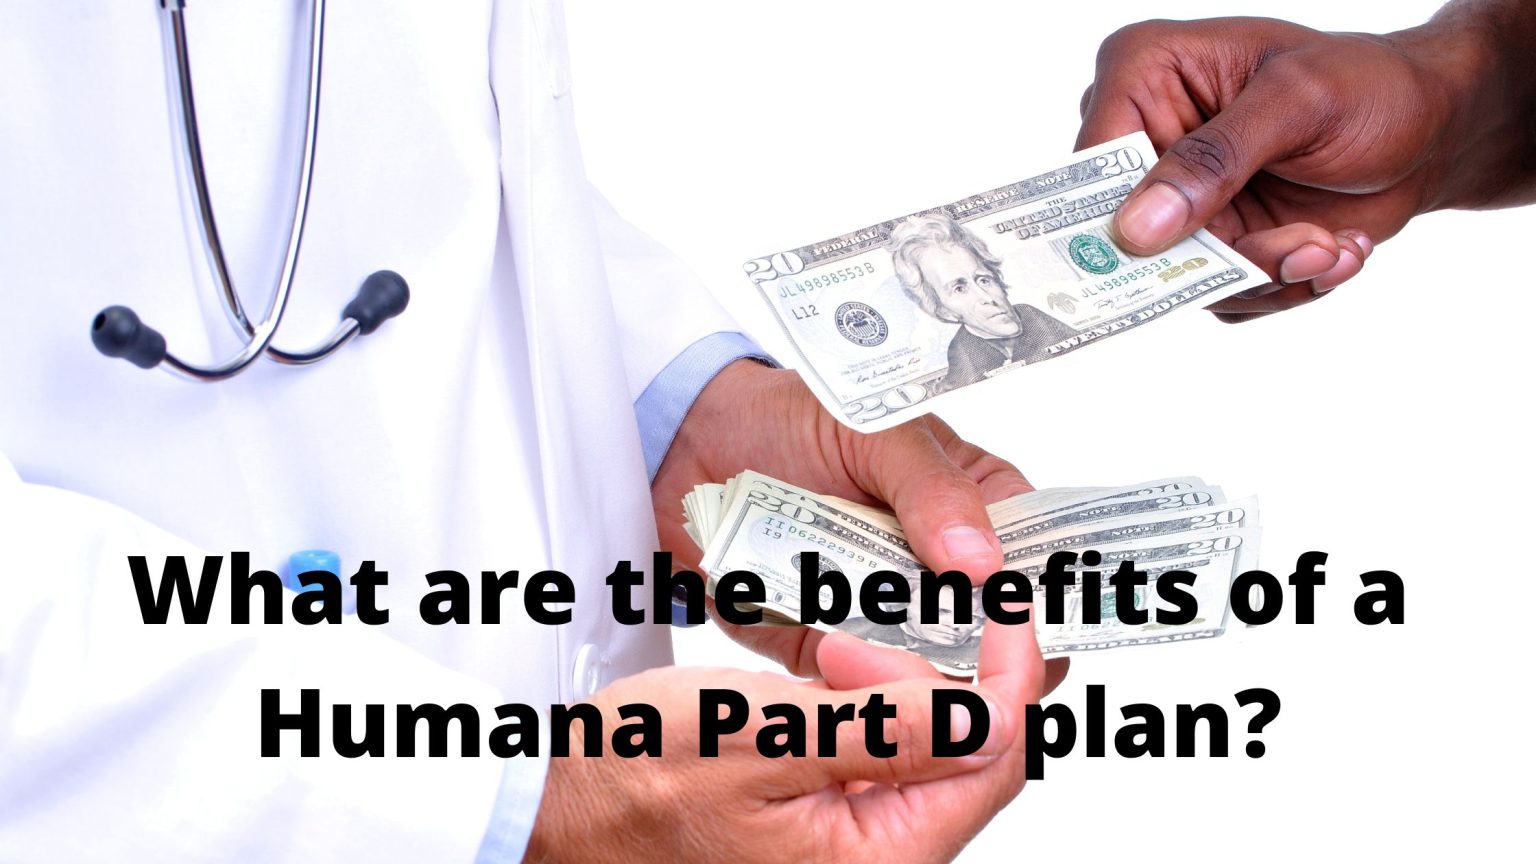 Humana Part D Plans and What They Offer